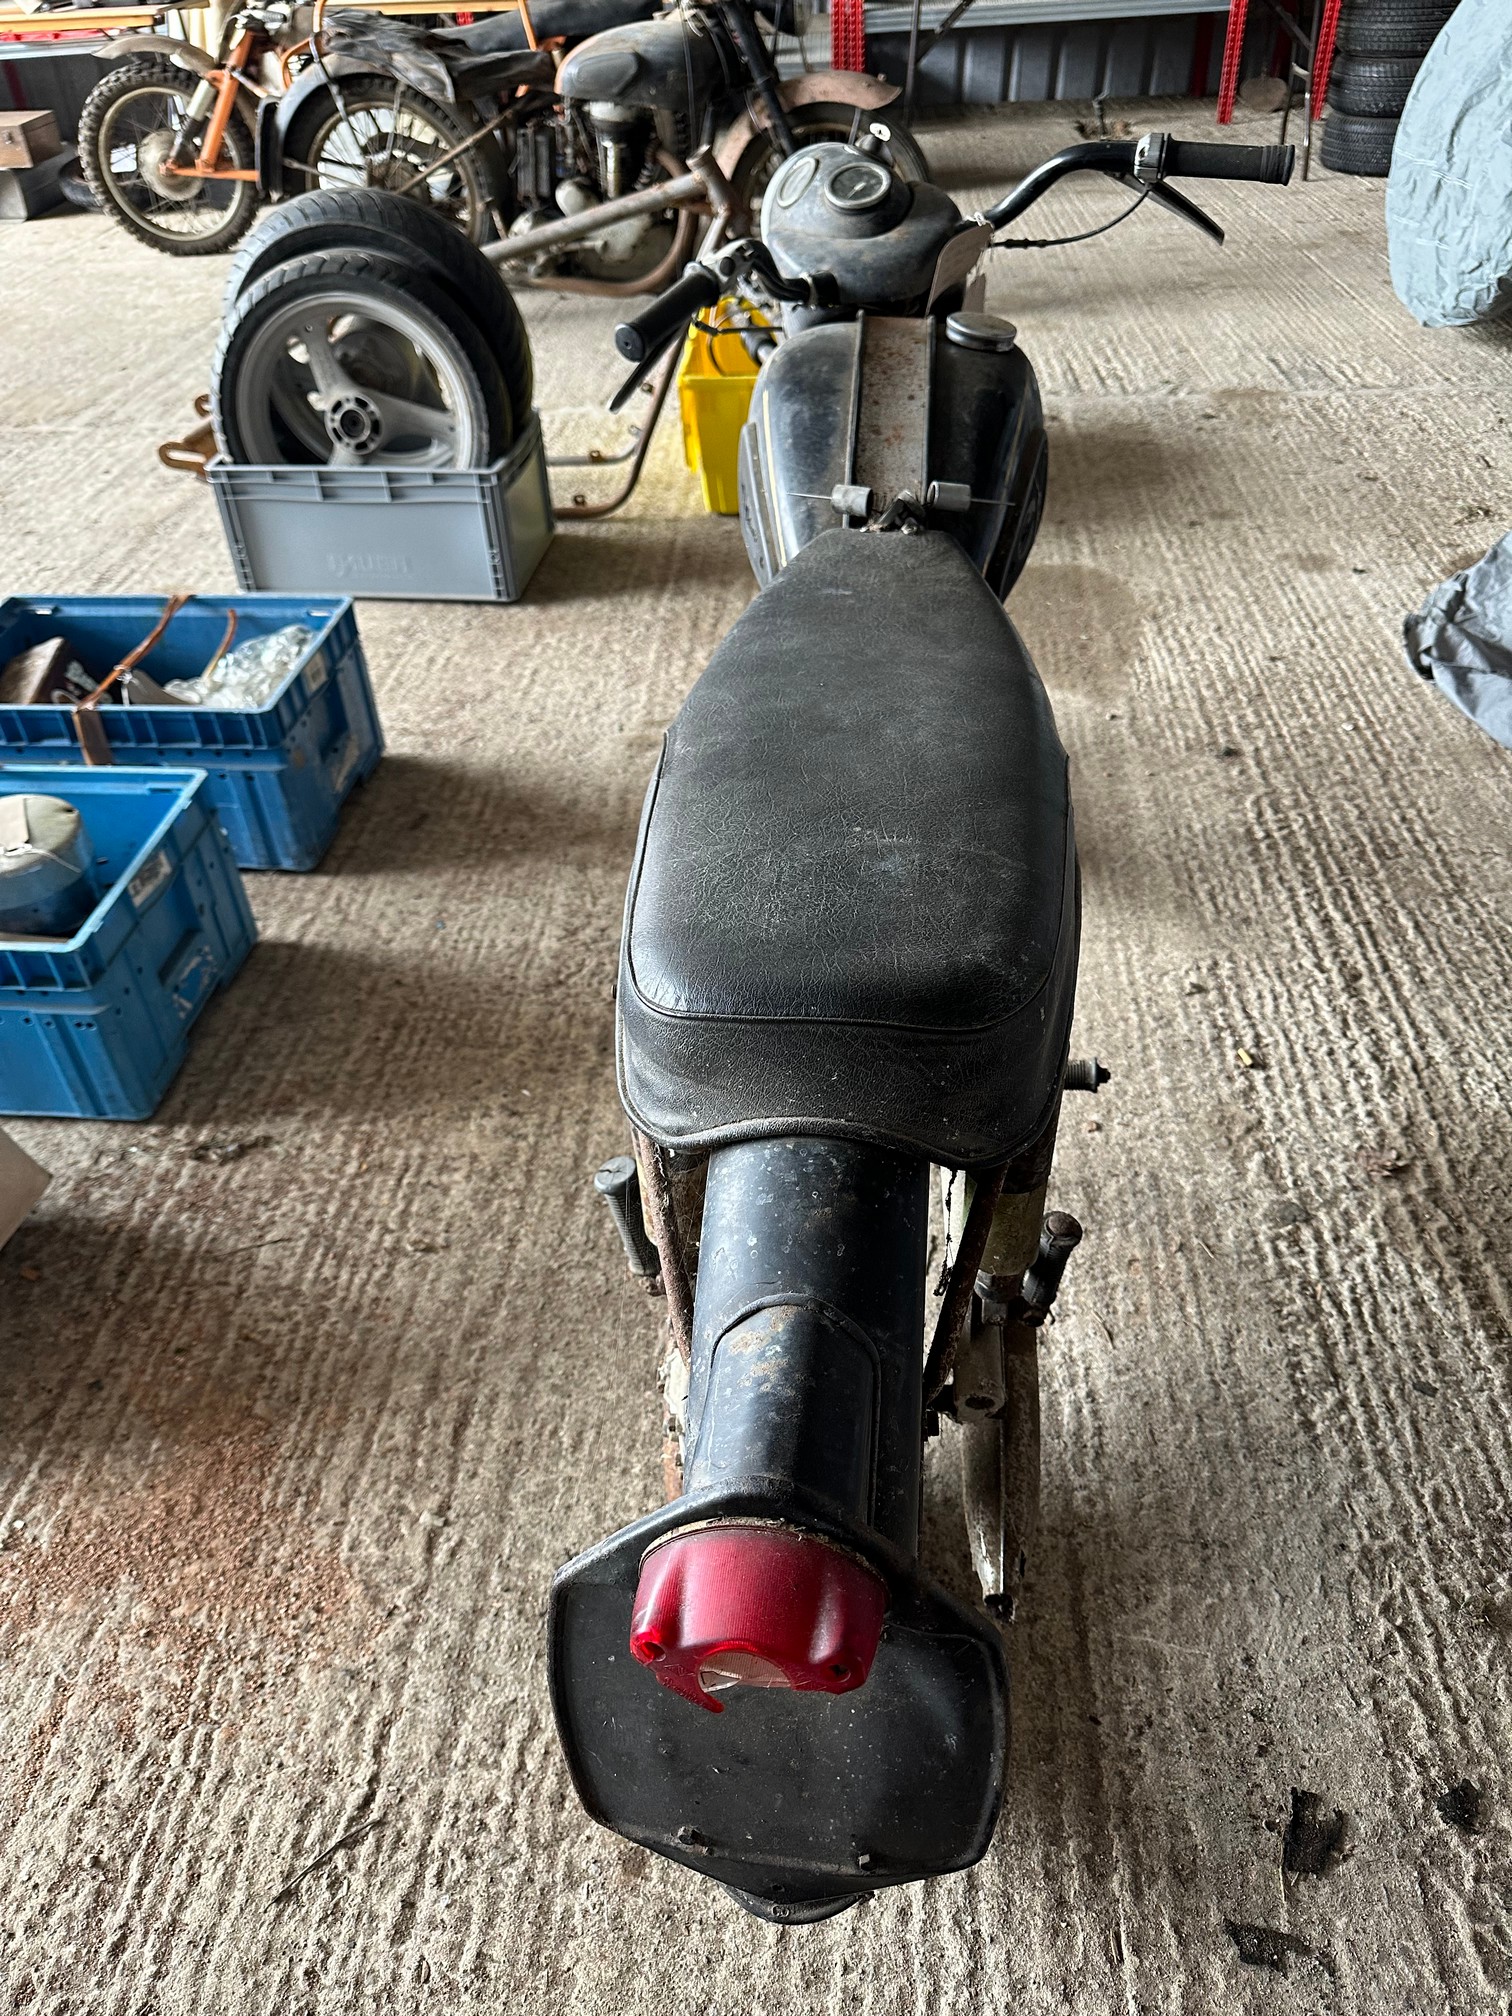 1960 VELOCETTE VALIANT 192cc PROJECT - Image 5 of 9